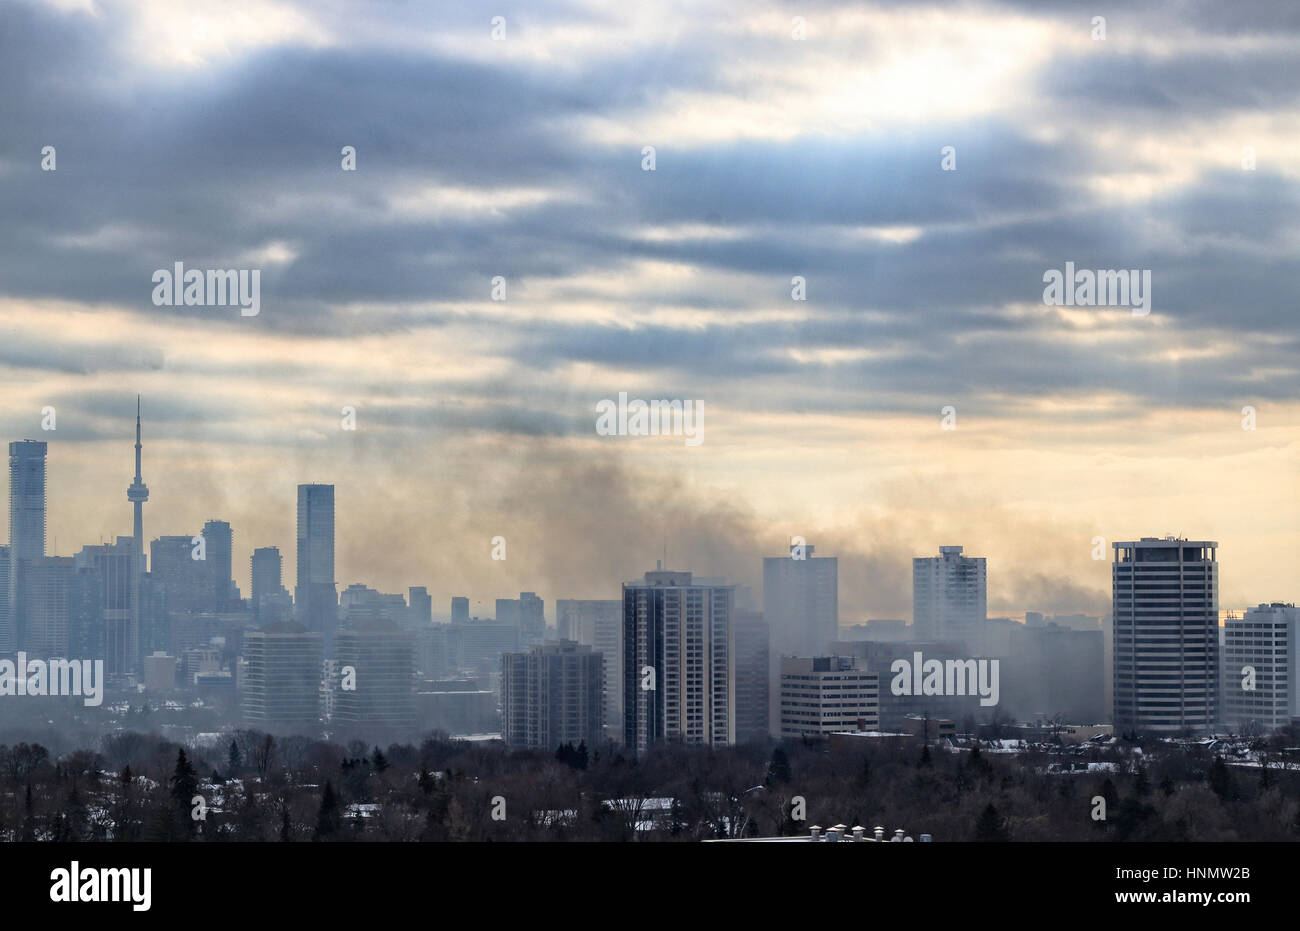 Toronto, Canada. 14th Feb, 2017. Massive smoke spreading into the sky after 6-alarm fire broke out from historic Badminton & Racquet Club of Toronto on St. Clair Avenue by Yonge Street in Deer Park community at 9:20 am on February 14, 2017. The image was taken at 2:24 pm and the smoke was still thick. Credit: CharlineXia/Alamy Live News Stock Photo